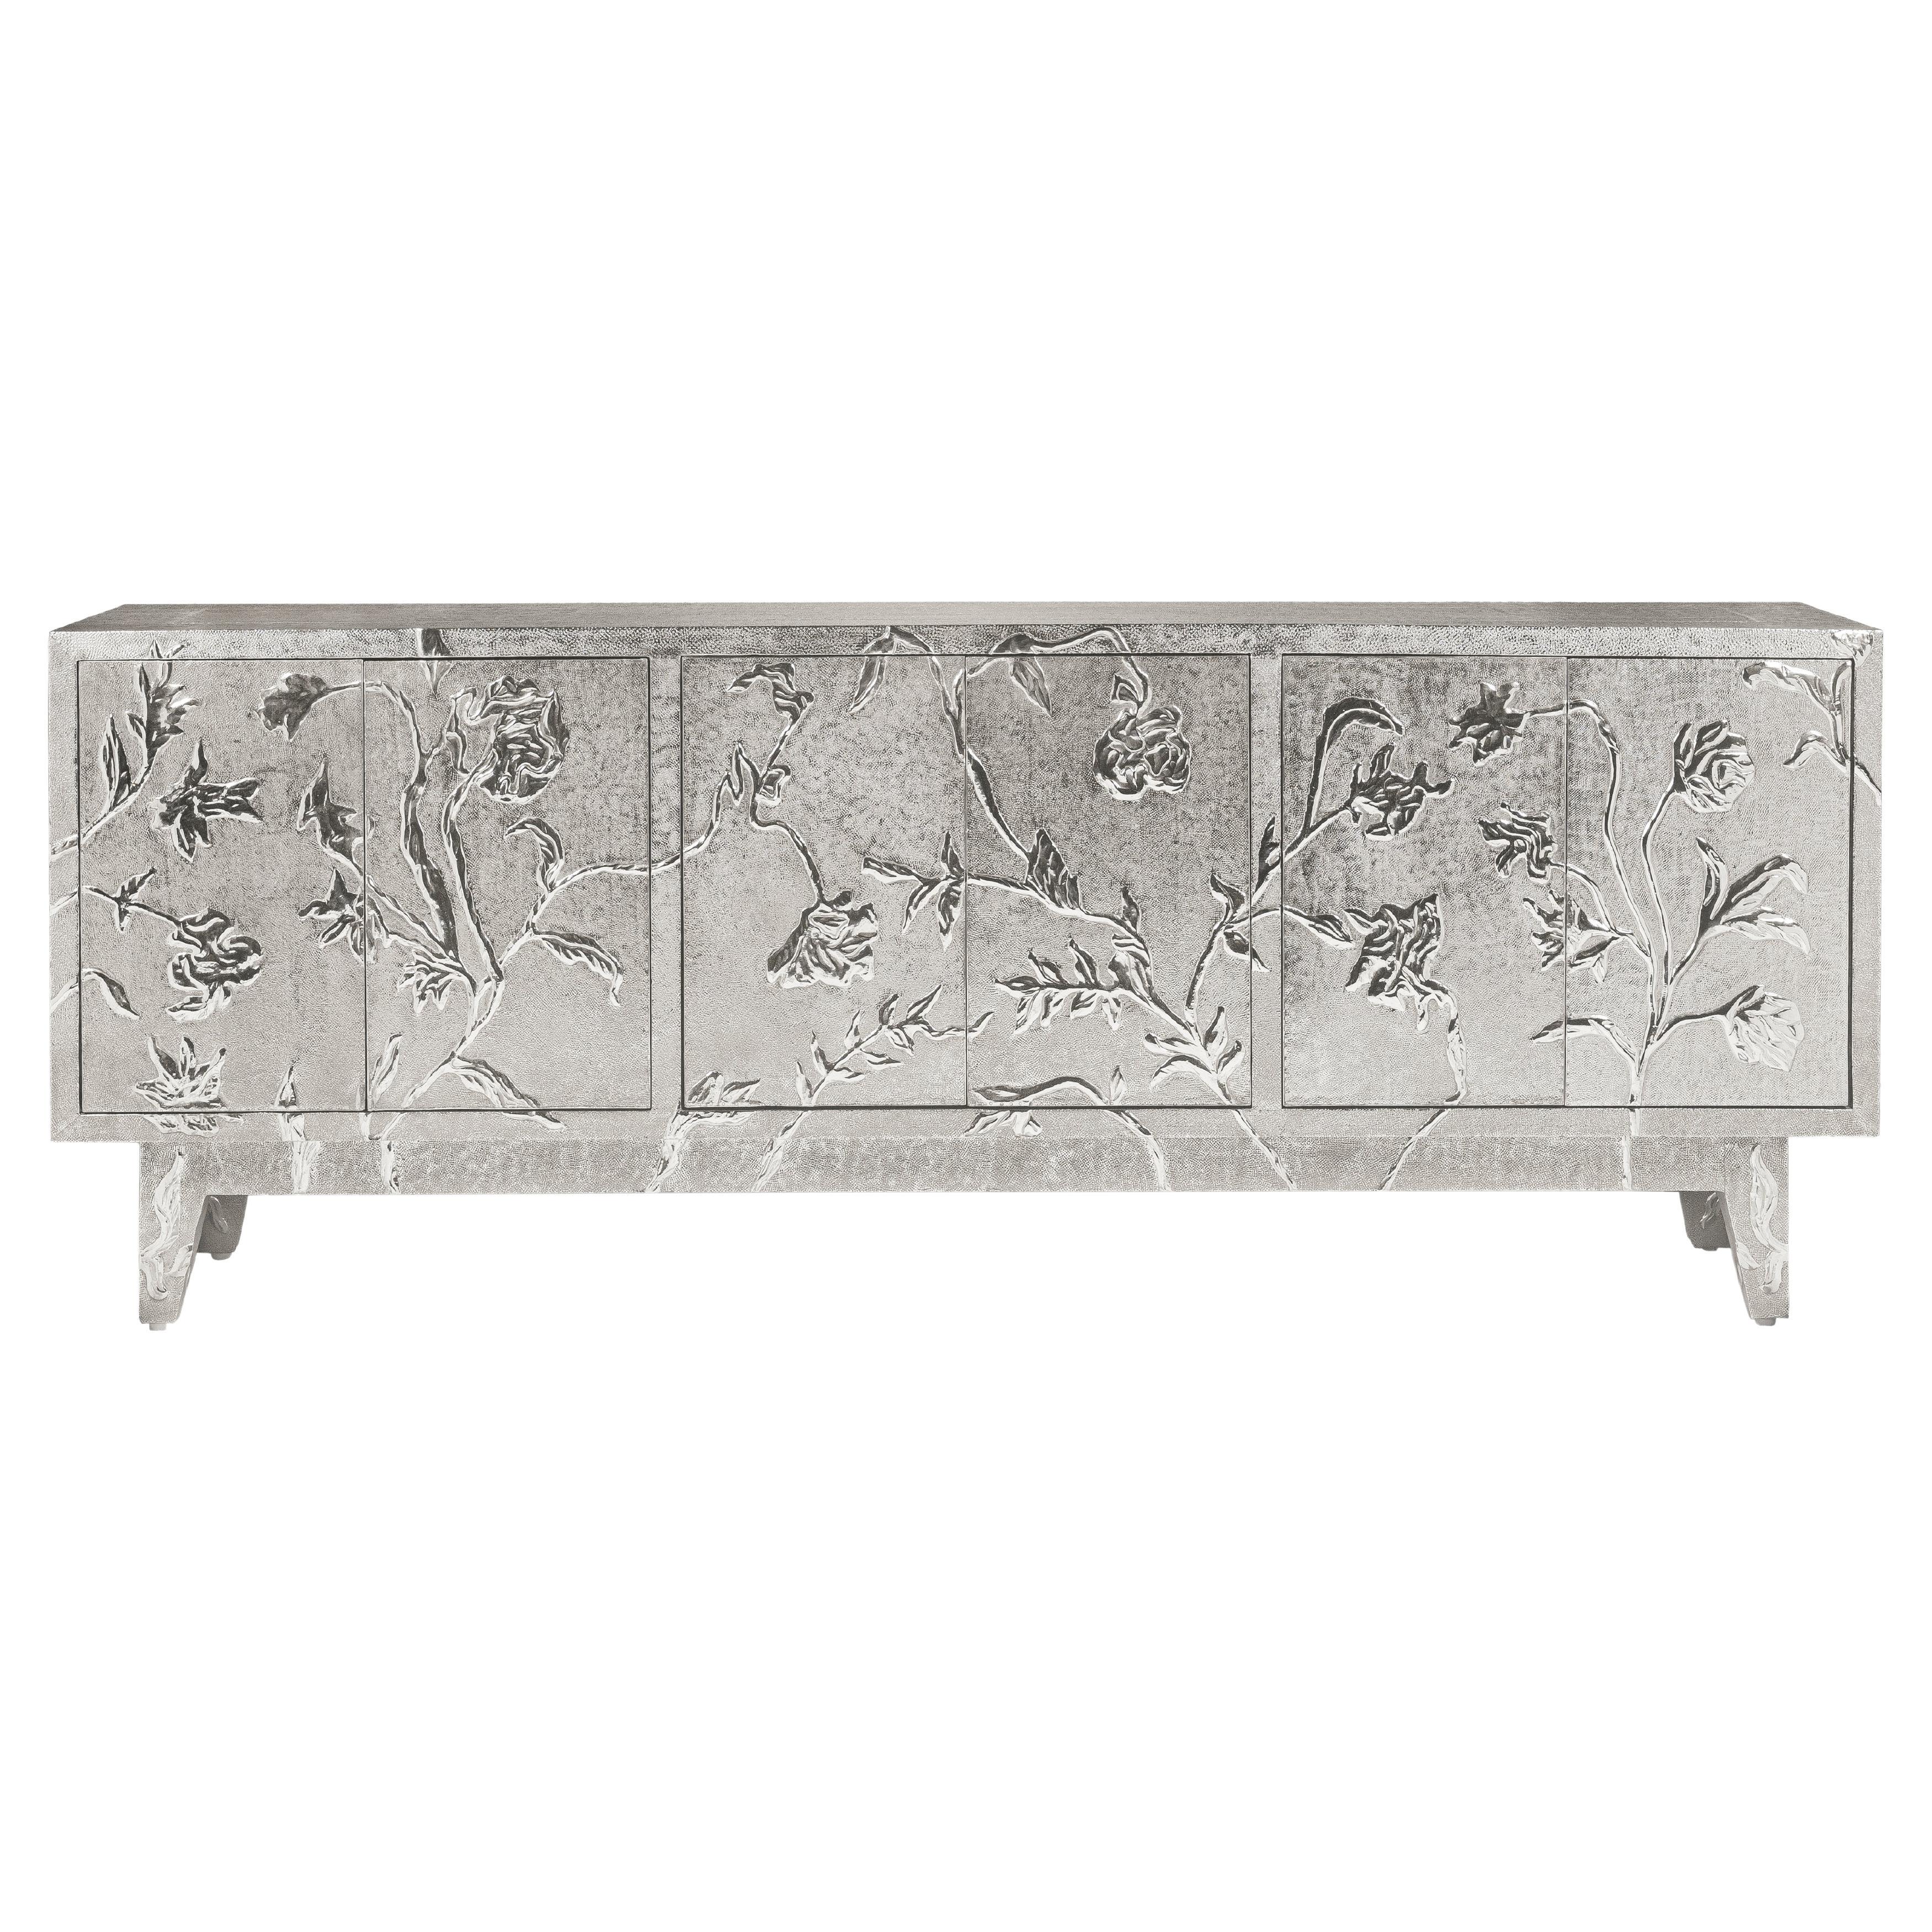 Art Deco Chest of Drawers in Floral Design by Stephanie Odegard